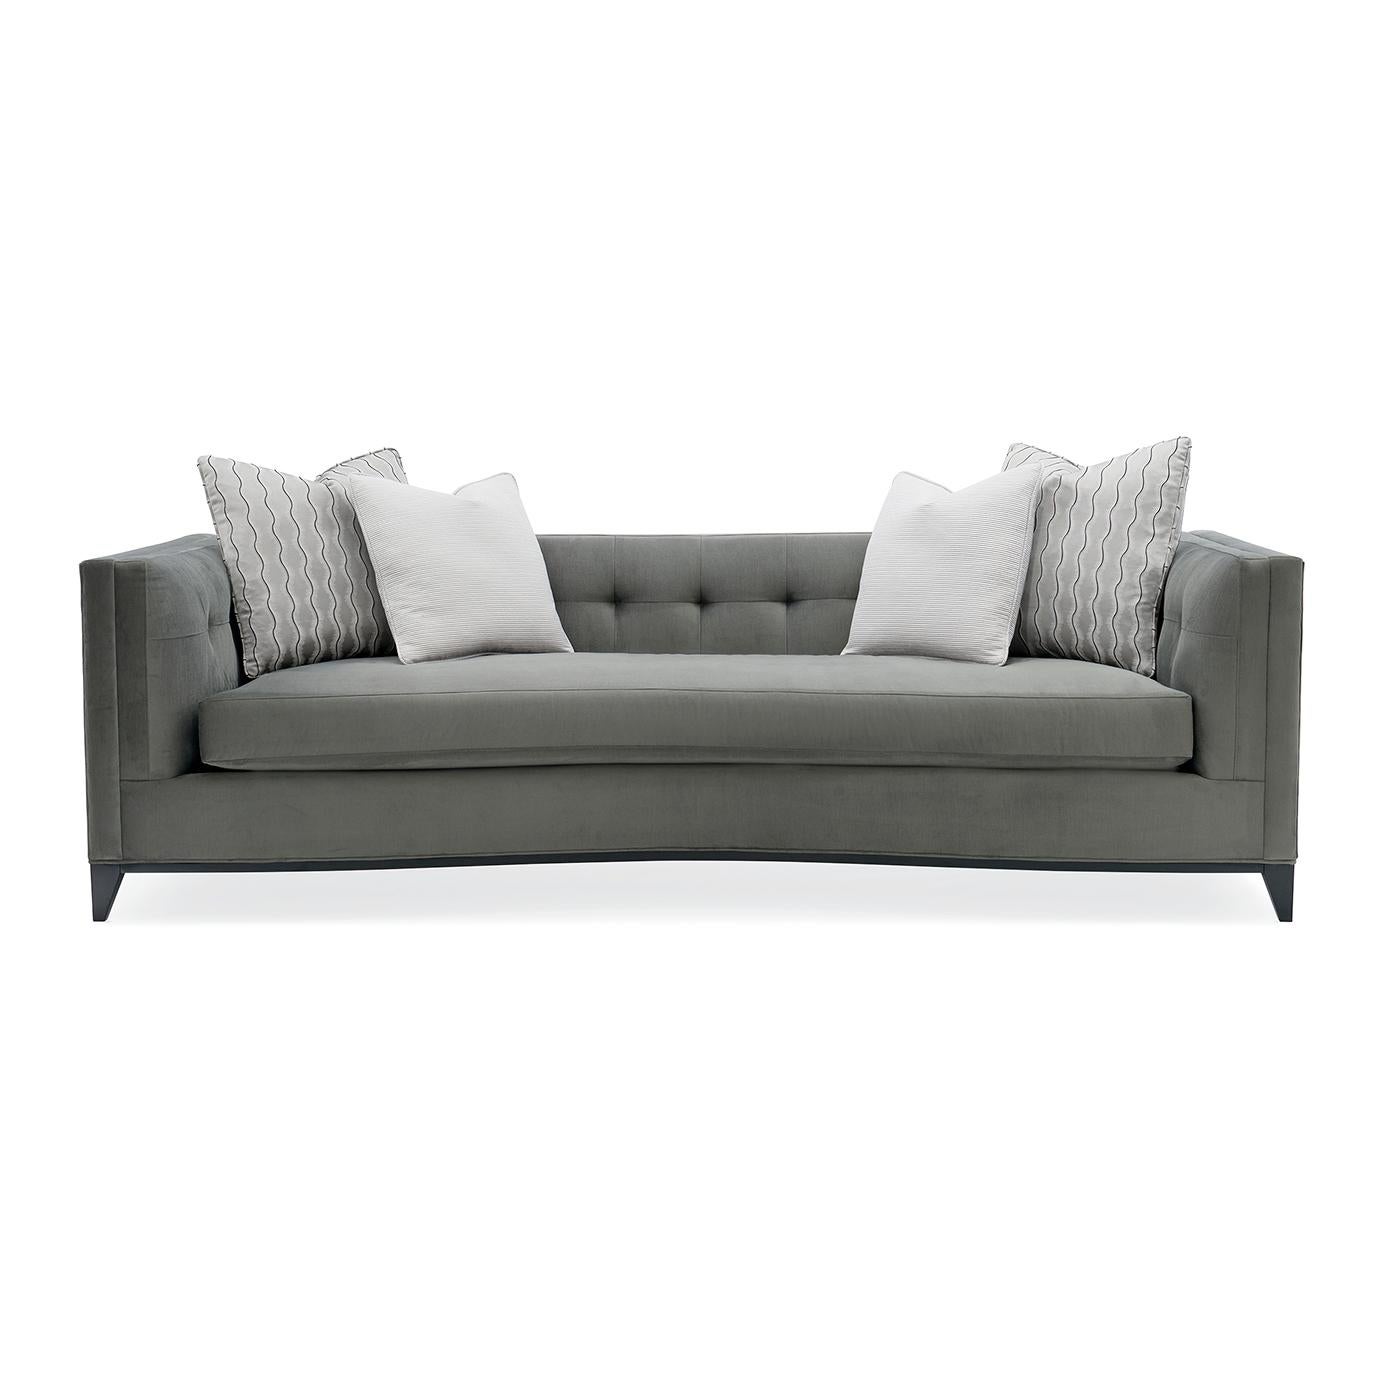 Neah mid century tufted sofa. Relax and unwind in style with the generous proportions and unique character of this sofa. Its button-tufted arms and back ensure its comfort while conveying refined elegance. Upholstered in a flannel grey strie velvet,